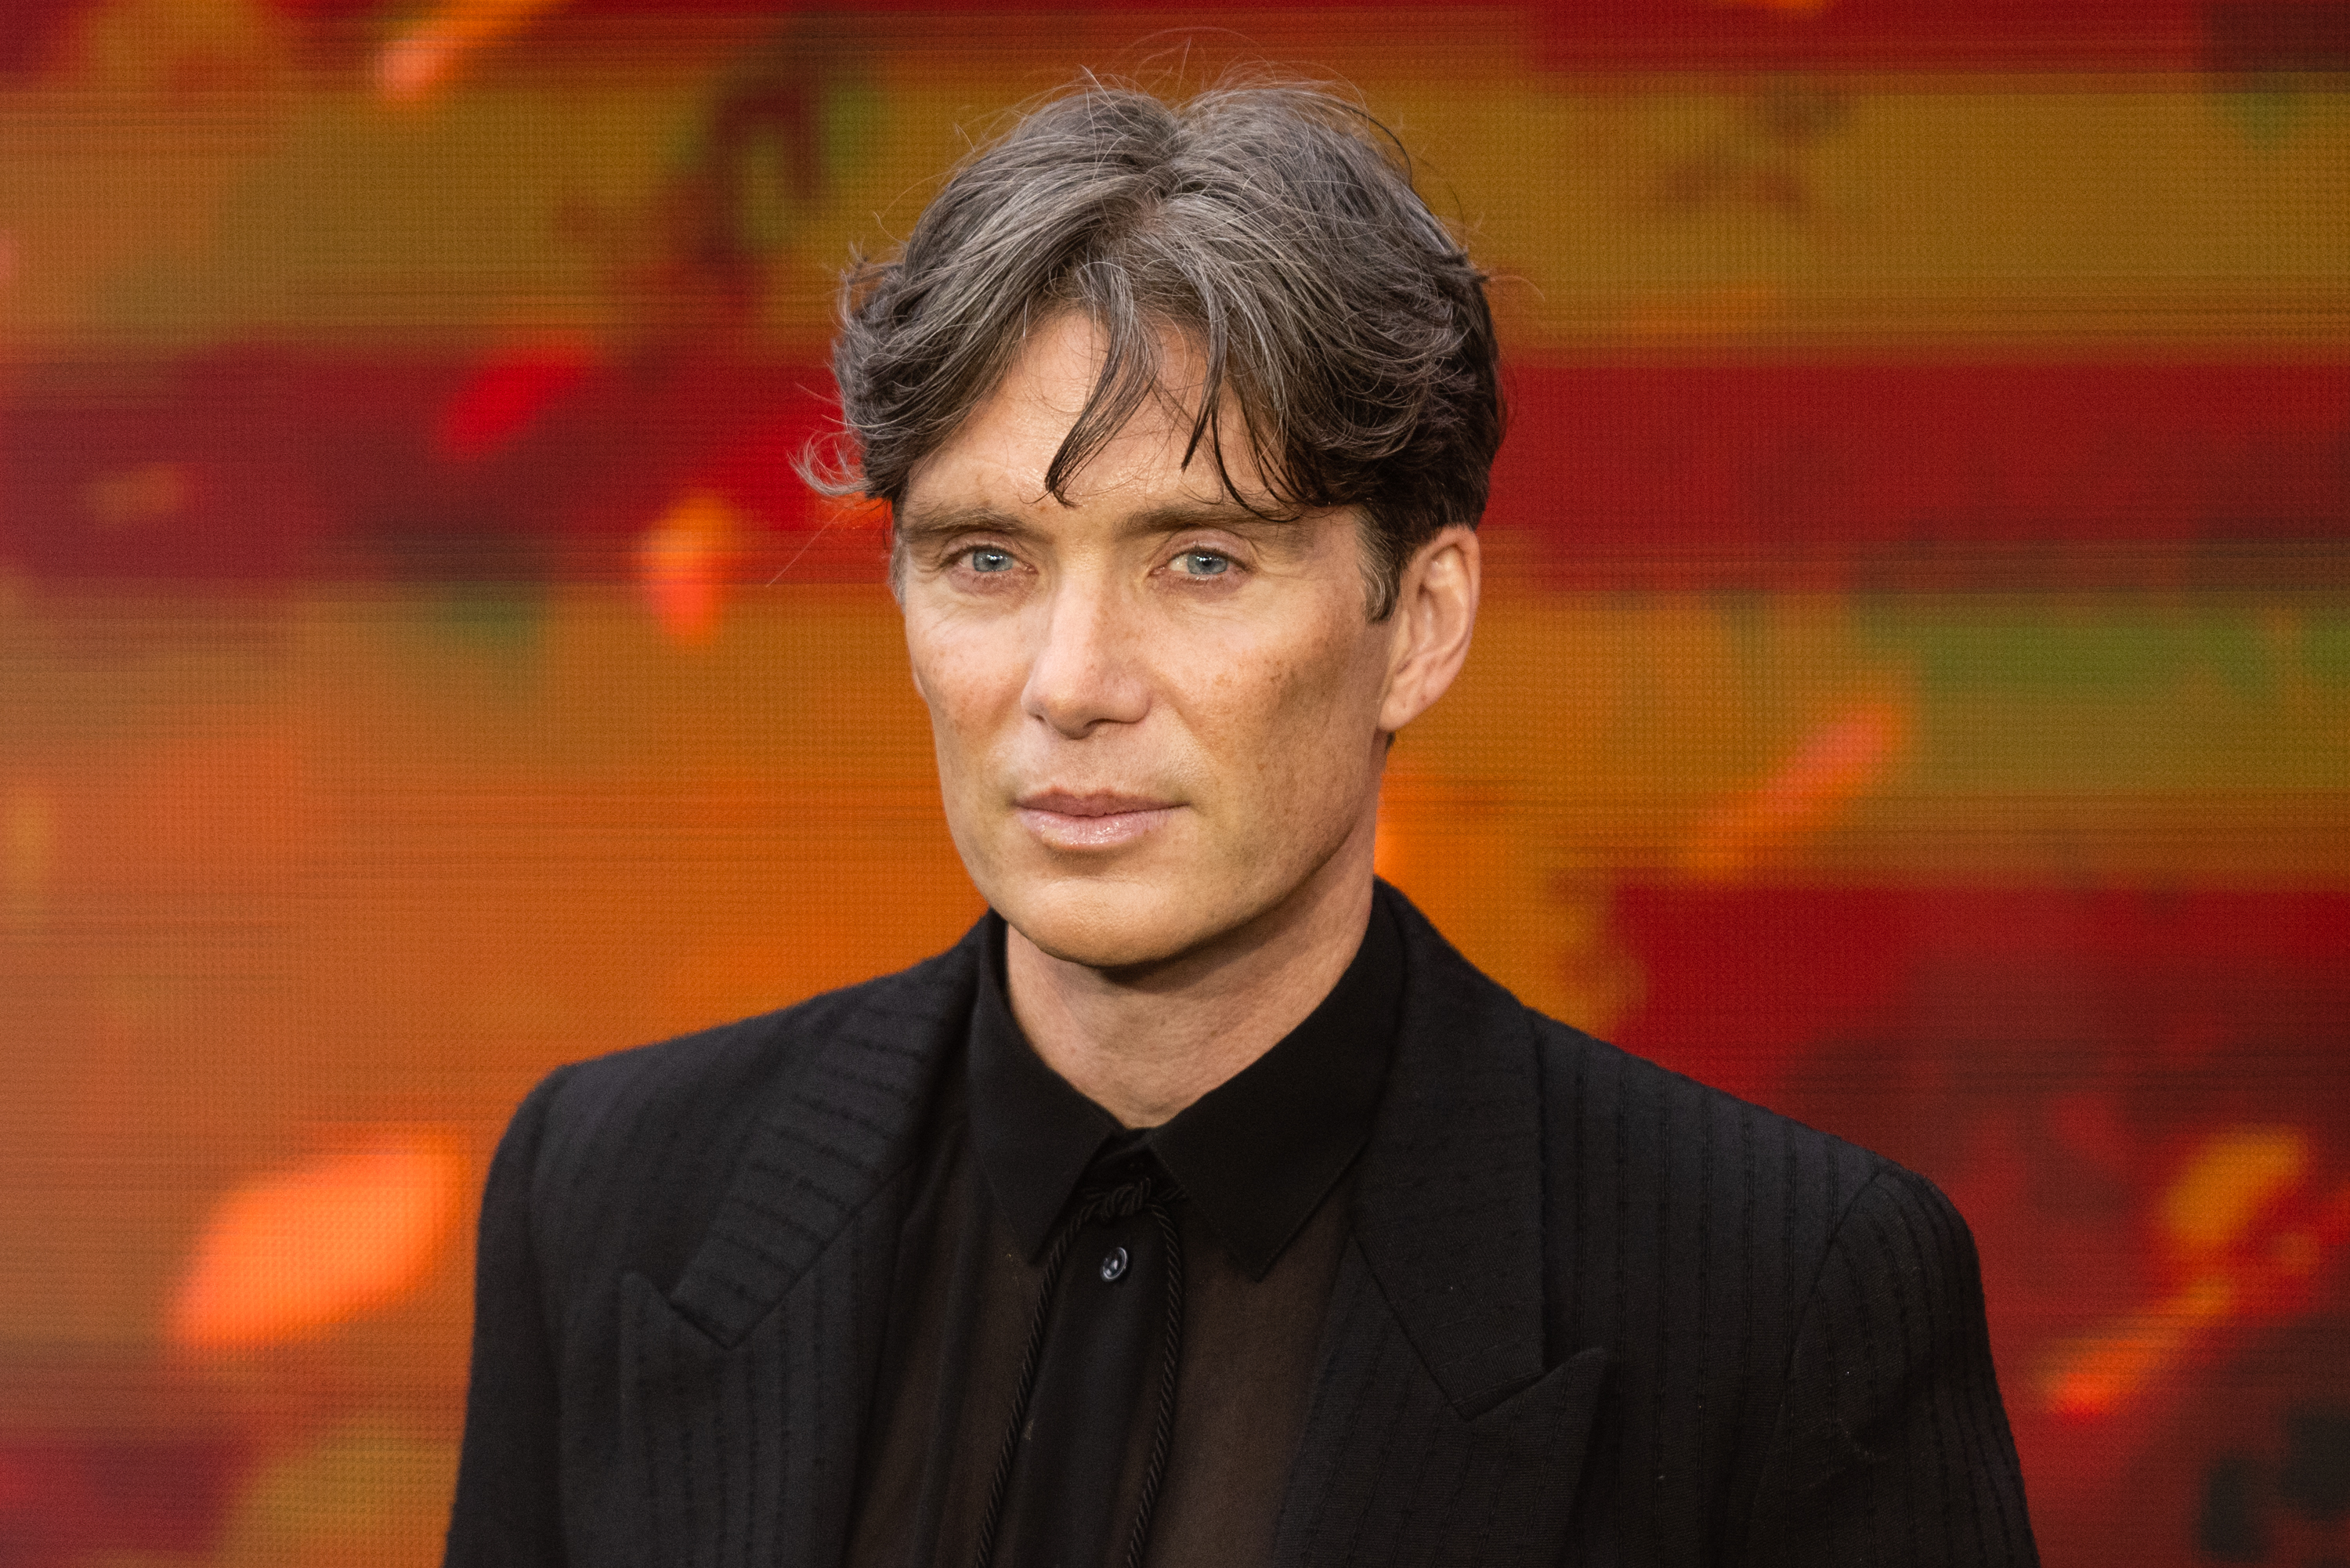 Cillian Murphy attends the UK premiere "Oppenheimer," 2023 | Source: Getty Images